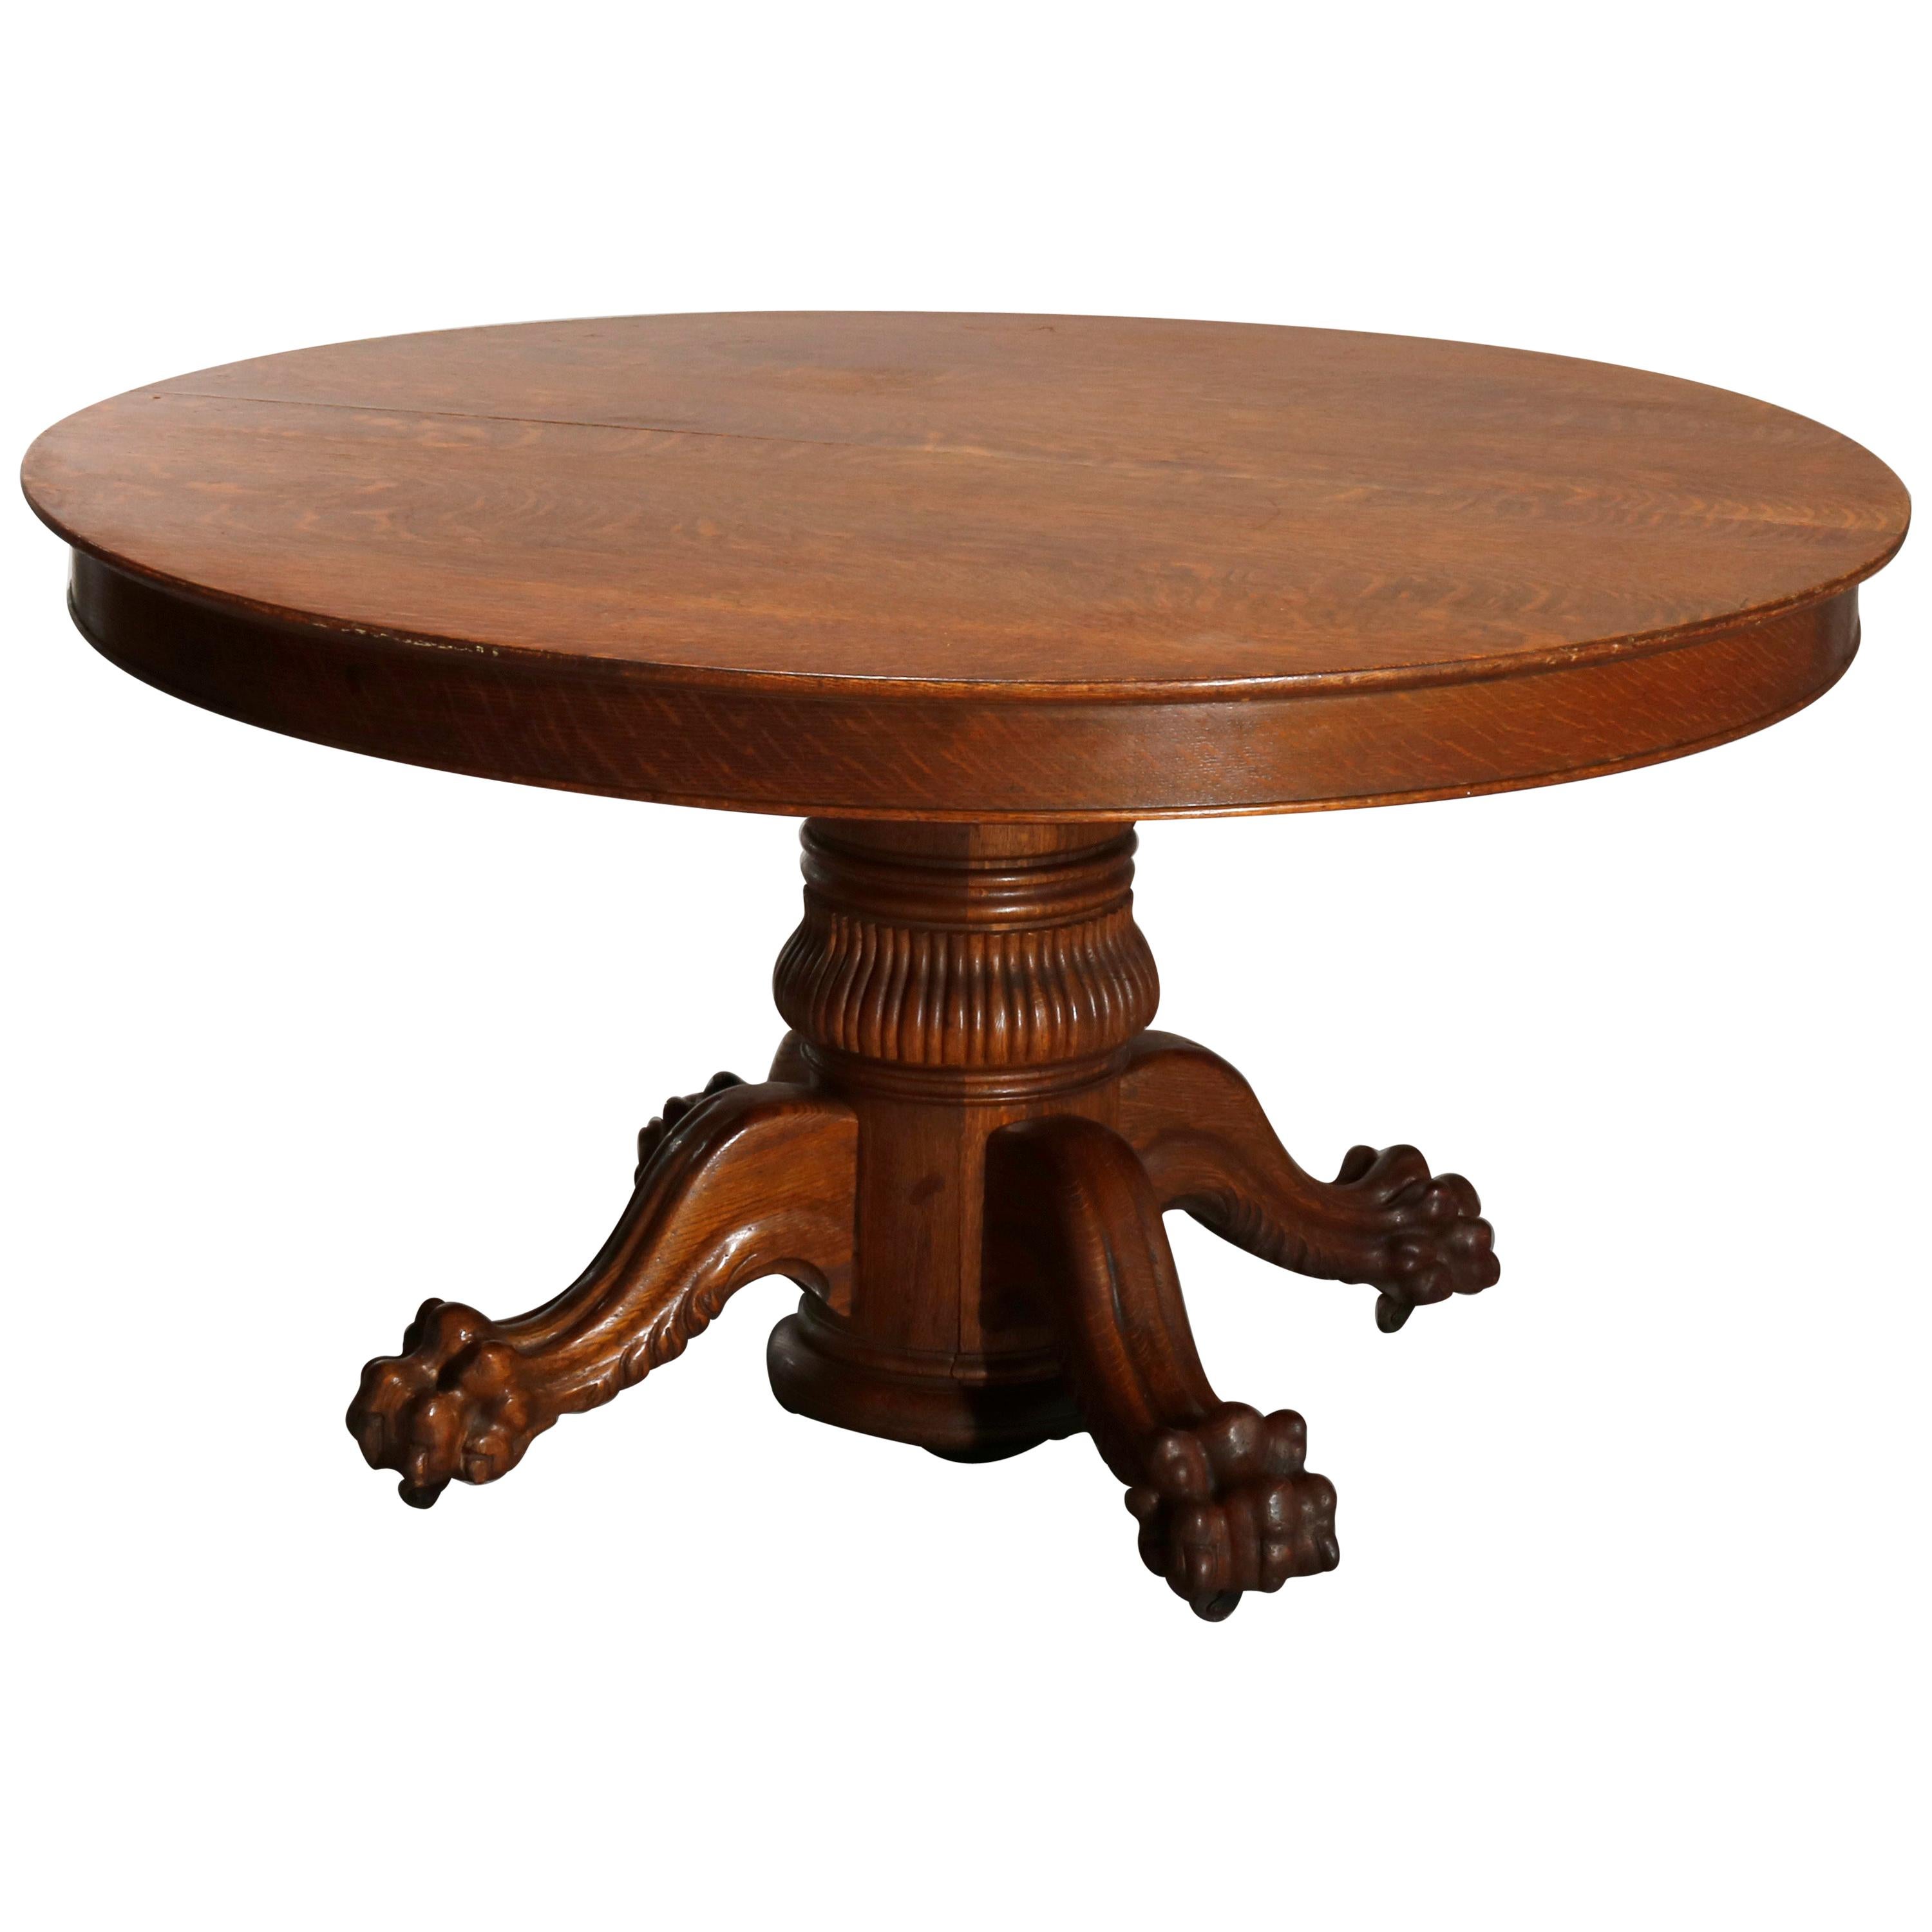 Antique Hastings Carved Oak Claw Foot Split Pedestal Dining Table, circa 1910